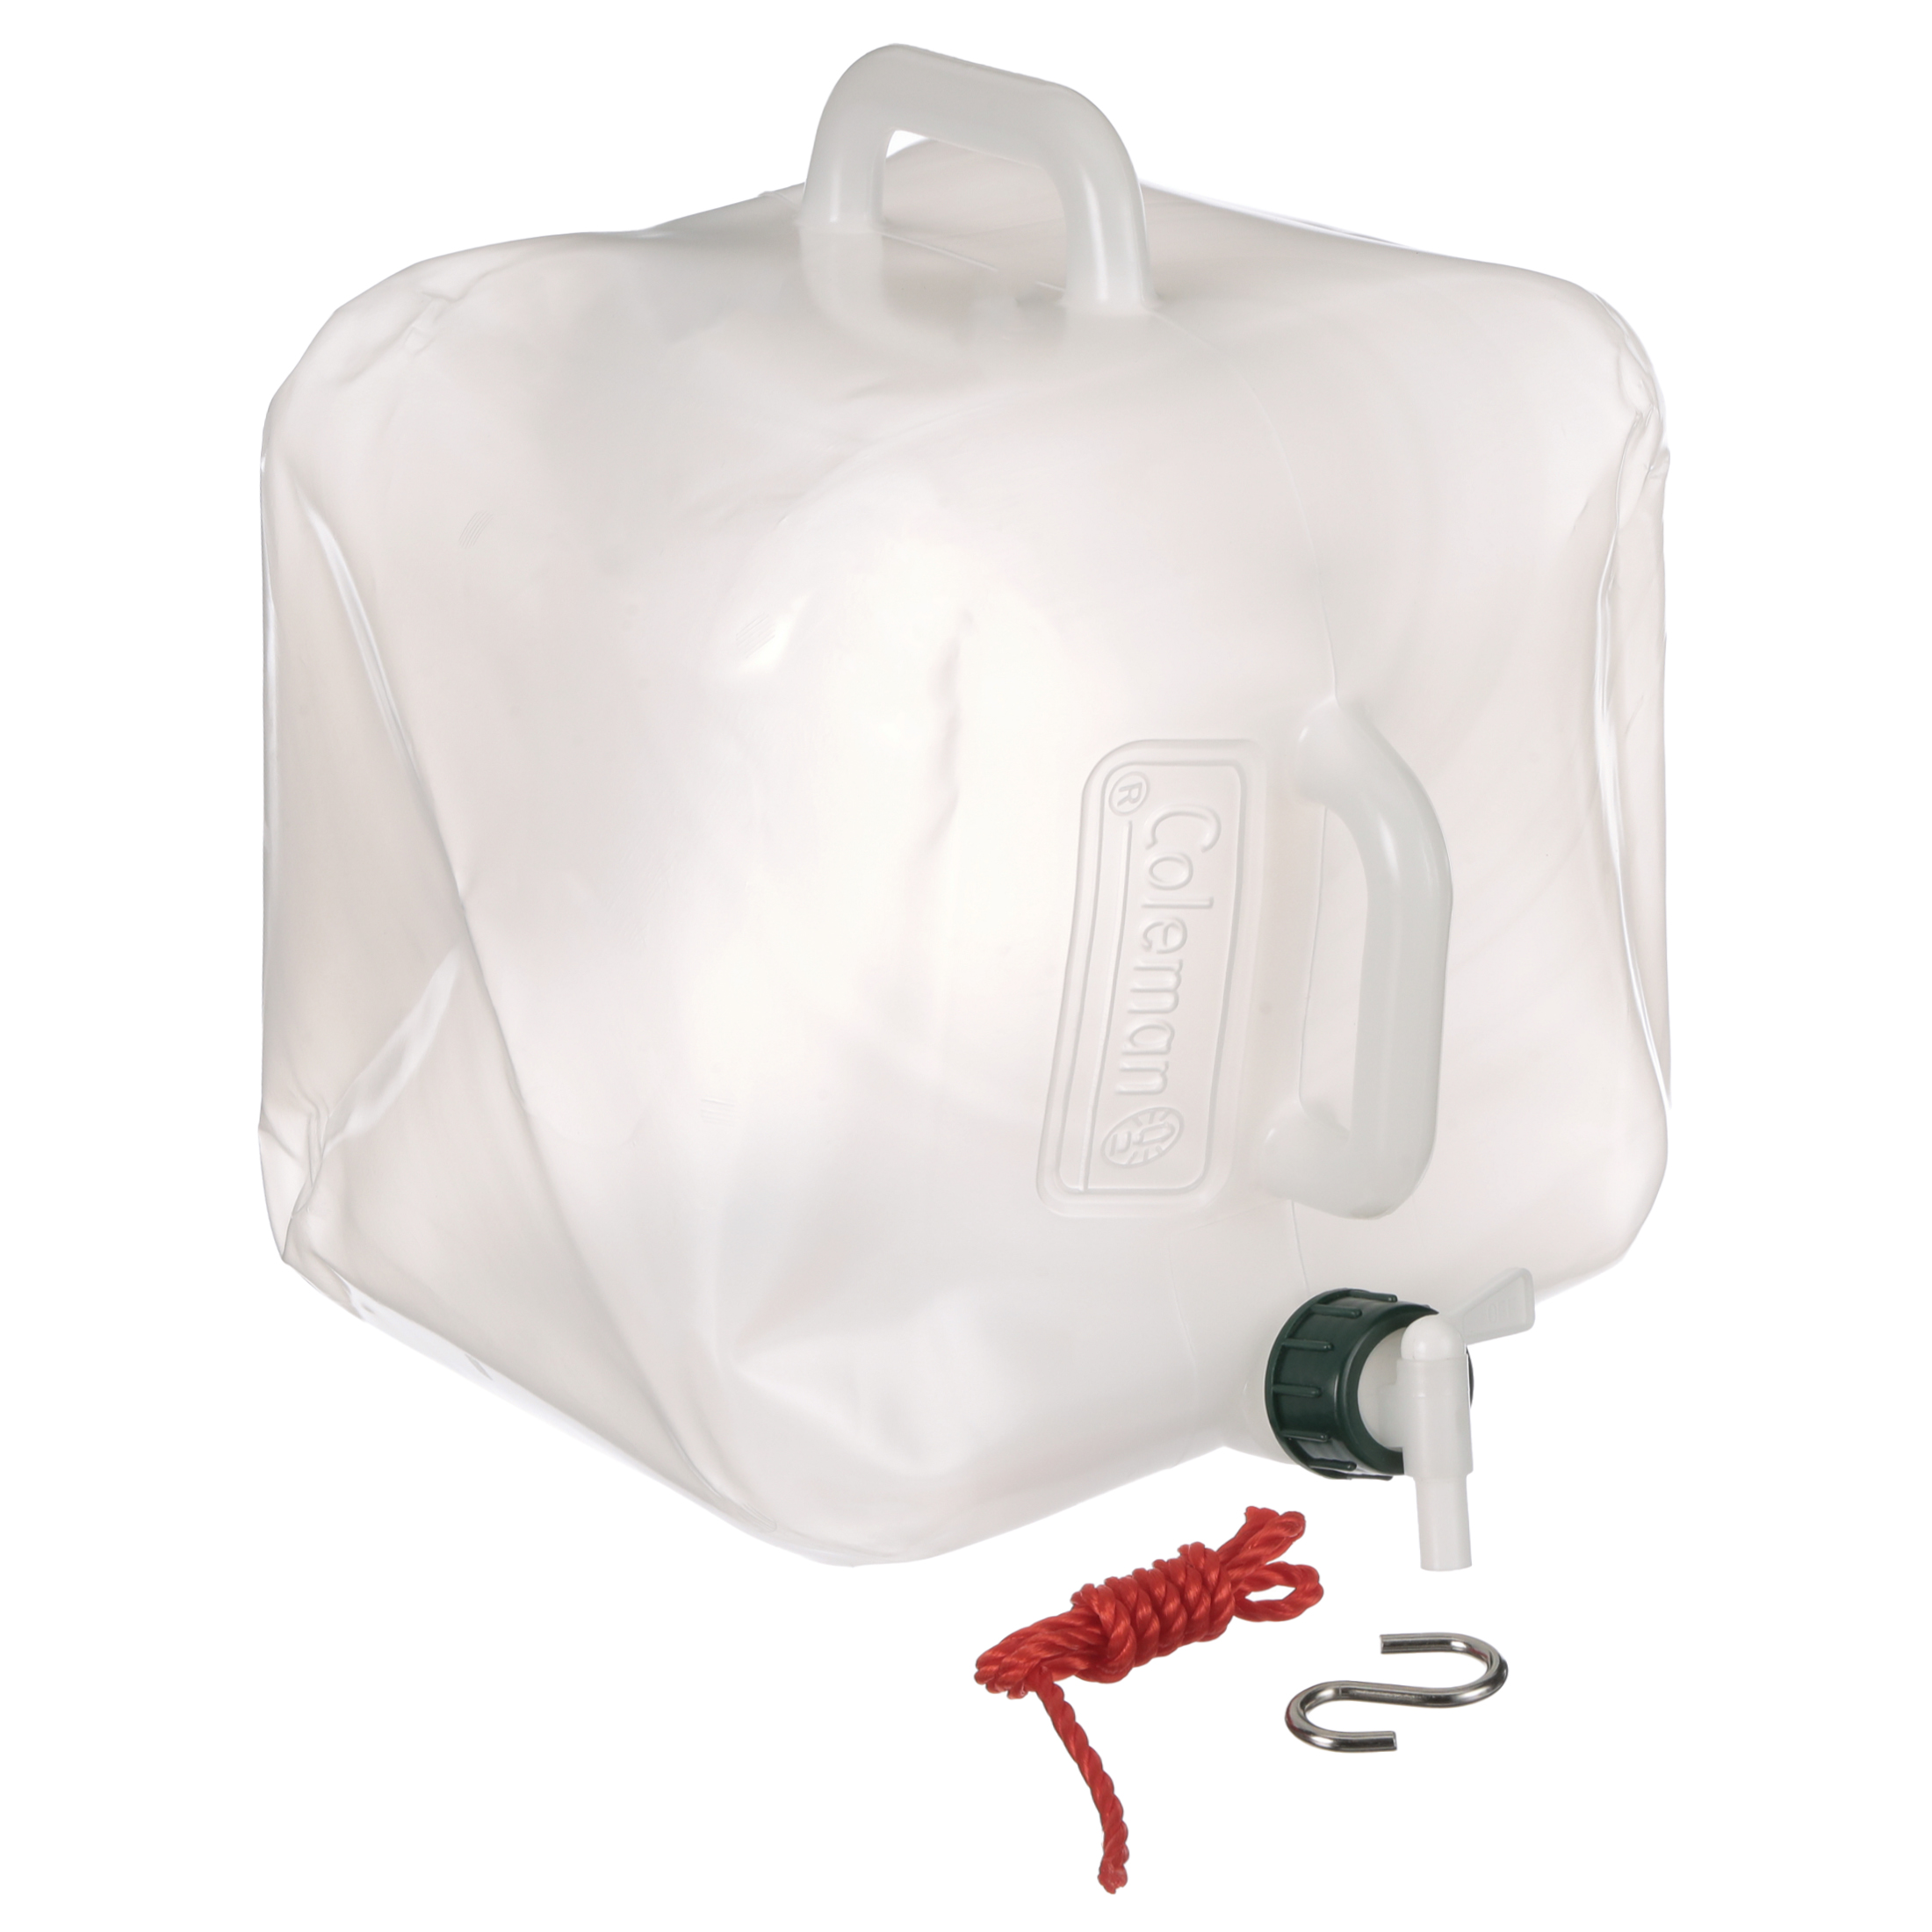 Coleman 5 Gallon Easy Carry Portable Water Carrier with Removable Spigot, Clear - image 8 of 10